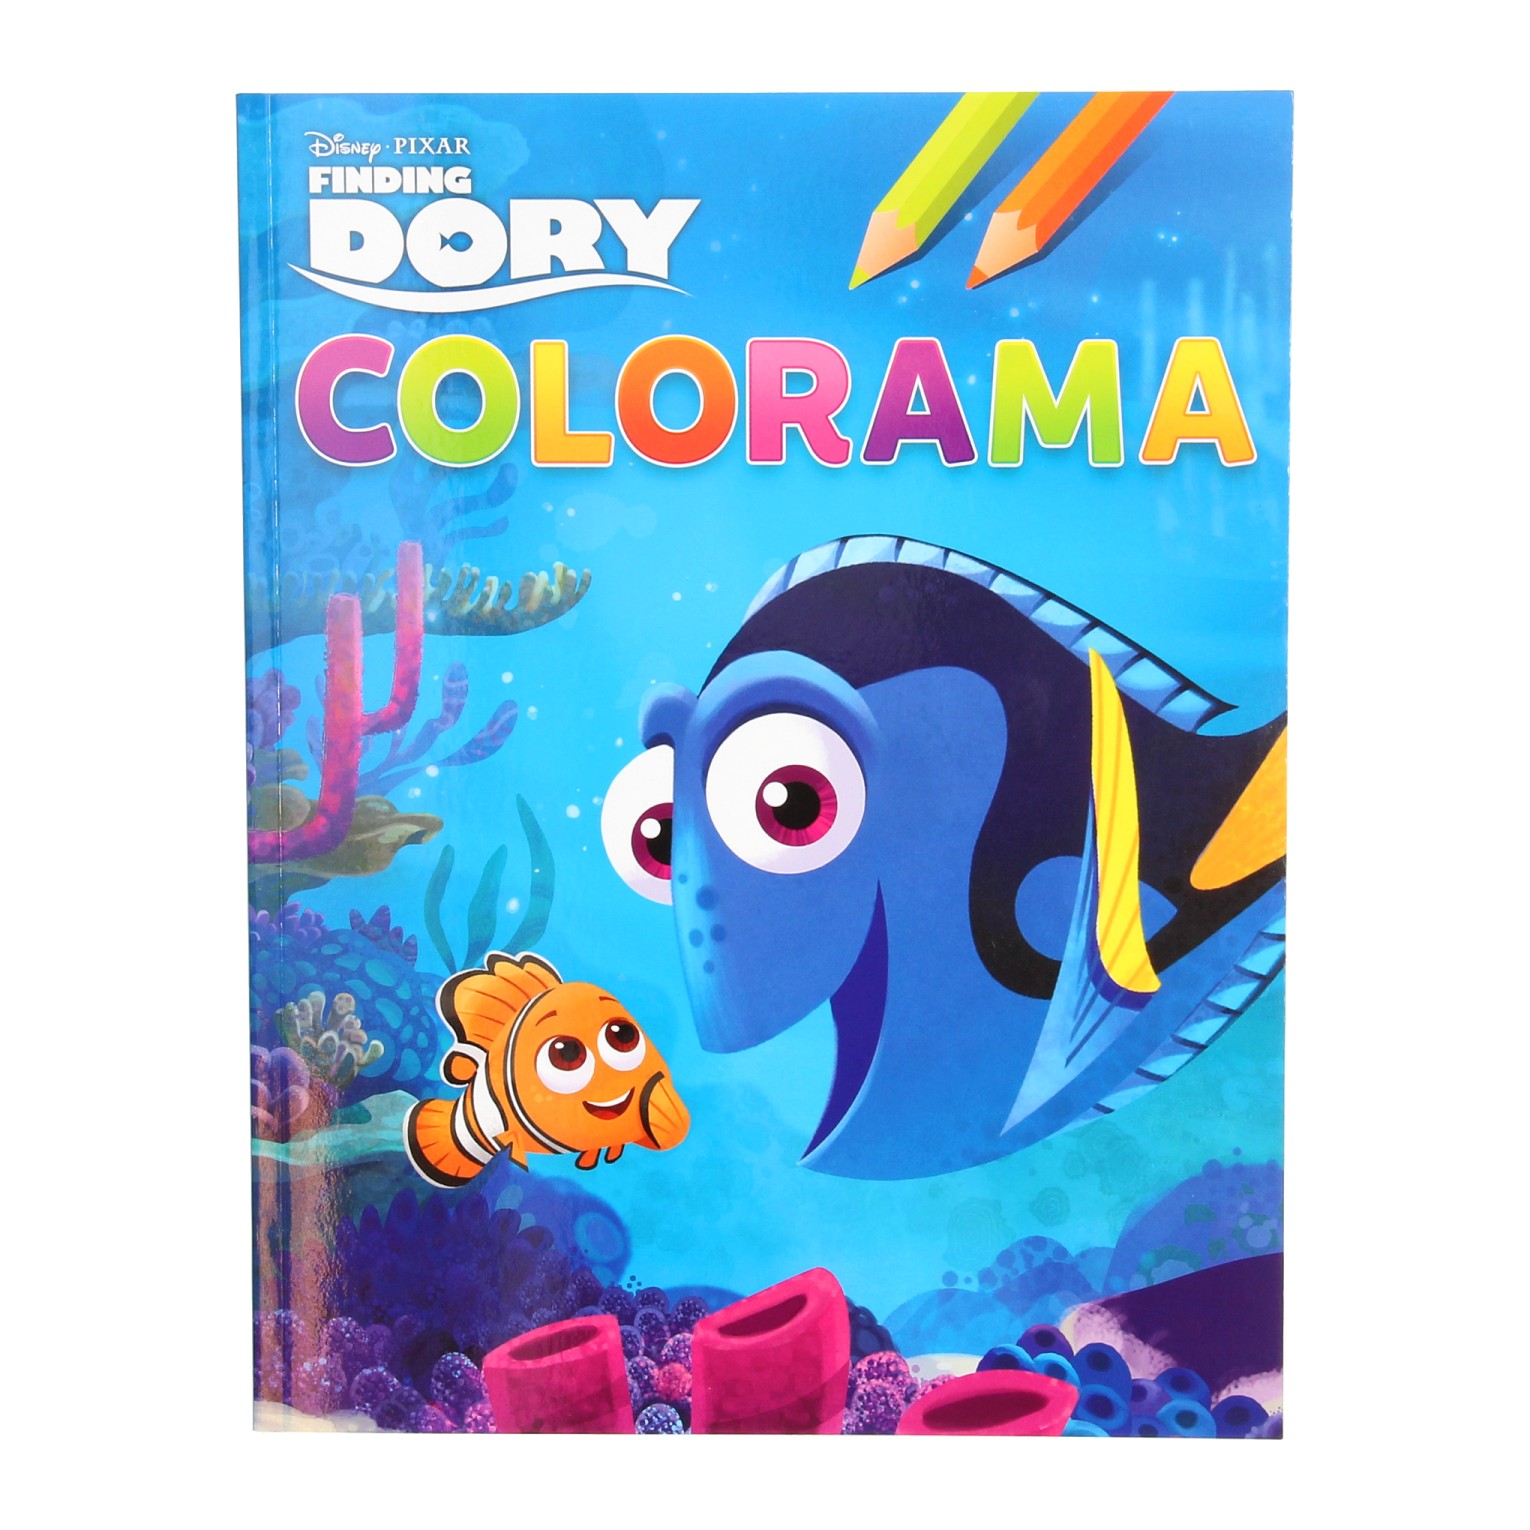 Finding Dory Colorama